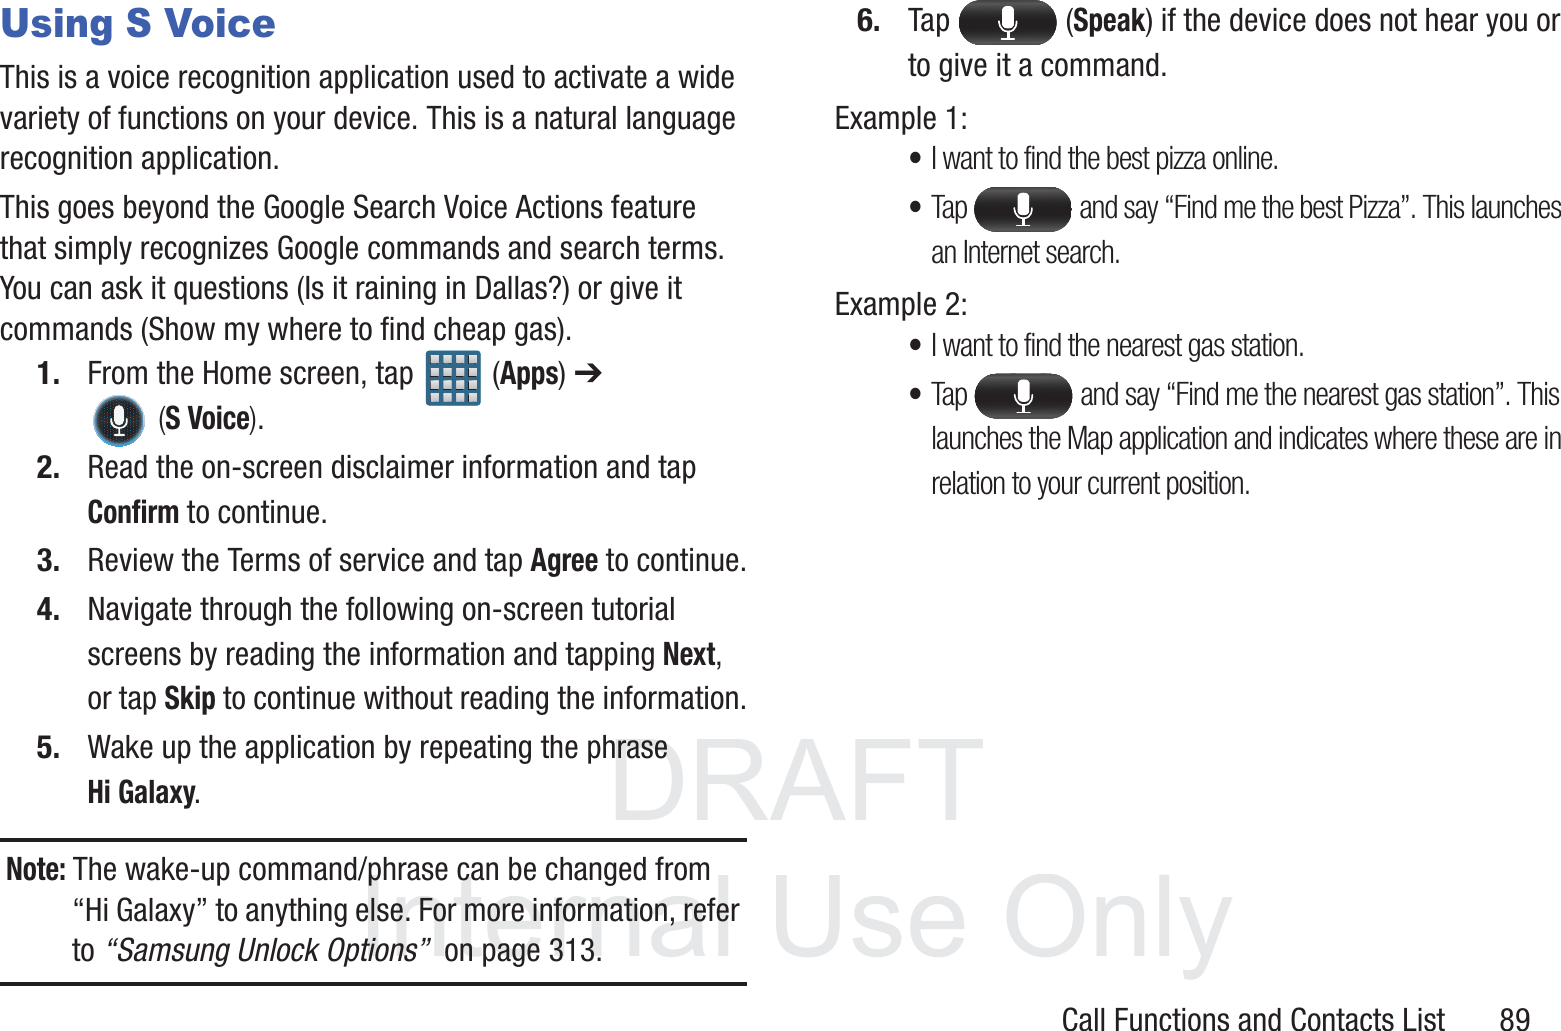 DRAFT InternalUse OnlyCall Functions and Contacts List       89Using S VoiceThis is a voice recognition application used to activate a wide variety of functions on your device. This is a natural language recognition application. This goes beyond the Google Search Voice Actions feature that simply recognizes Google commands and search terms. You can ask it questions (Is it raining in Dallas?) or give it commands (Show my where to find cheap gas).1. From the Home screen, tap   (Apps) ➔  (S Voice).2. Read the on-screen disclaimer information and tap Confirm to continue.3. Review the Terms of service and tap Agree to continue.4. Navigate through the following on-screen tutorial screens by reading the information and tapping Next, or tap Skip to continue without reading the information.5. Wake up the application by repeating the phrase Hi Galaxy.Note: The wake-up command/phrase can be changed from “Hi Galaxy” to anything else. For more information, refer to “Samsung Unlock Options”  on page 313.6. Tap  (Speak) if the device does not hear you or to give it a command.Example 1:•I want to find the best pizza online.•Tap   and say “Find me the best Pizza”. This launches an Internet search.Example 2:•I want to find the nearest gas station.•Tap   and say “Find me the nearest gas station”. This launches the Map application and indicates where these are in relation to your current position.